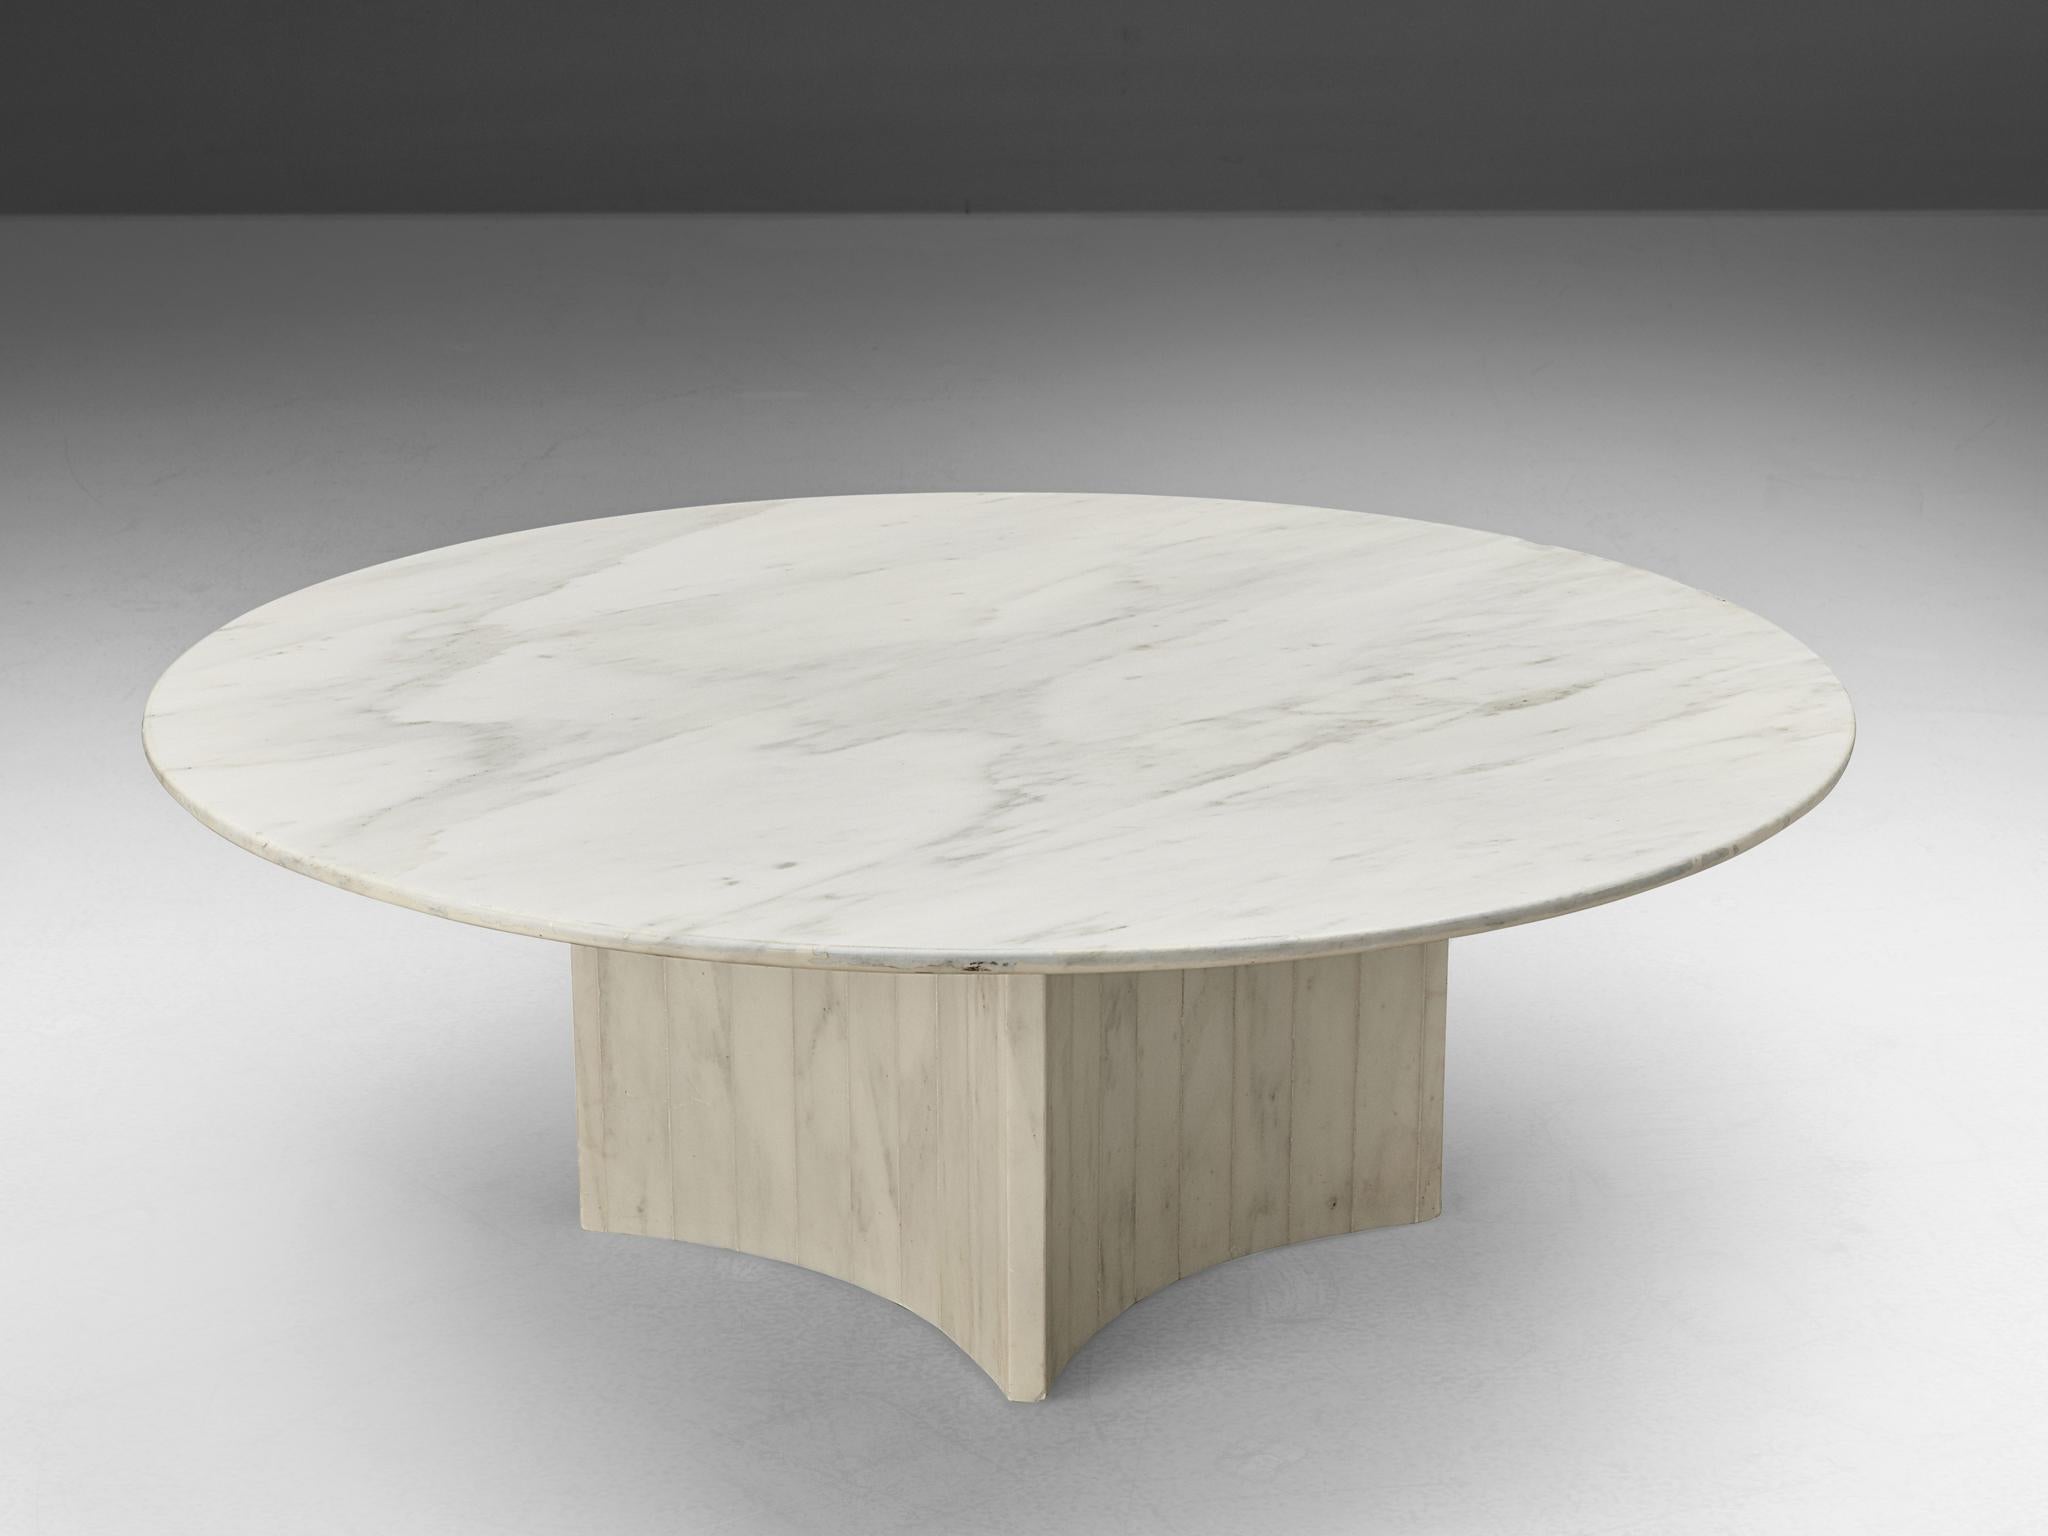 Coffee table, marble, Italy 1970s

This coffee table in marble features a lovey cloud pattern in the marble. The aesthetics are archetypical for postmodern design, with a tasteful contrast between the round tabletop and the fourfold concave base.